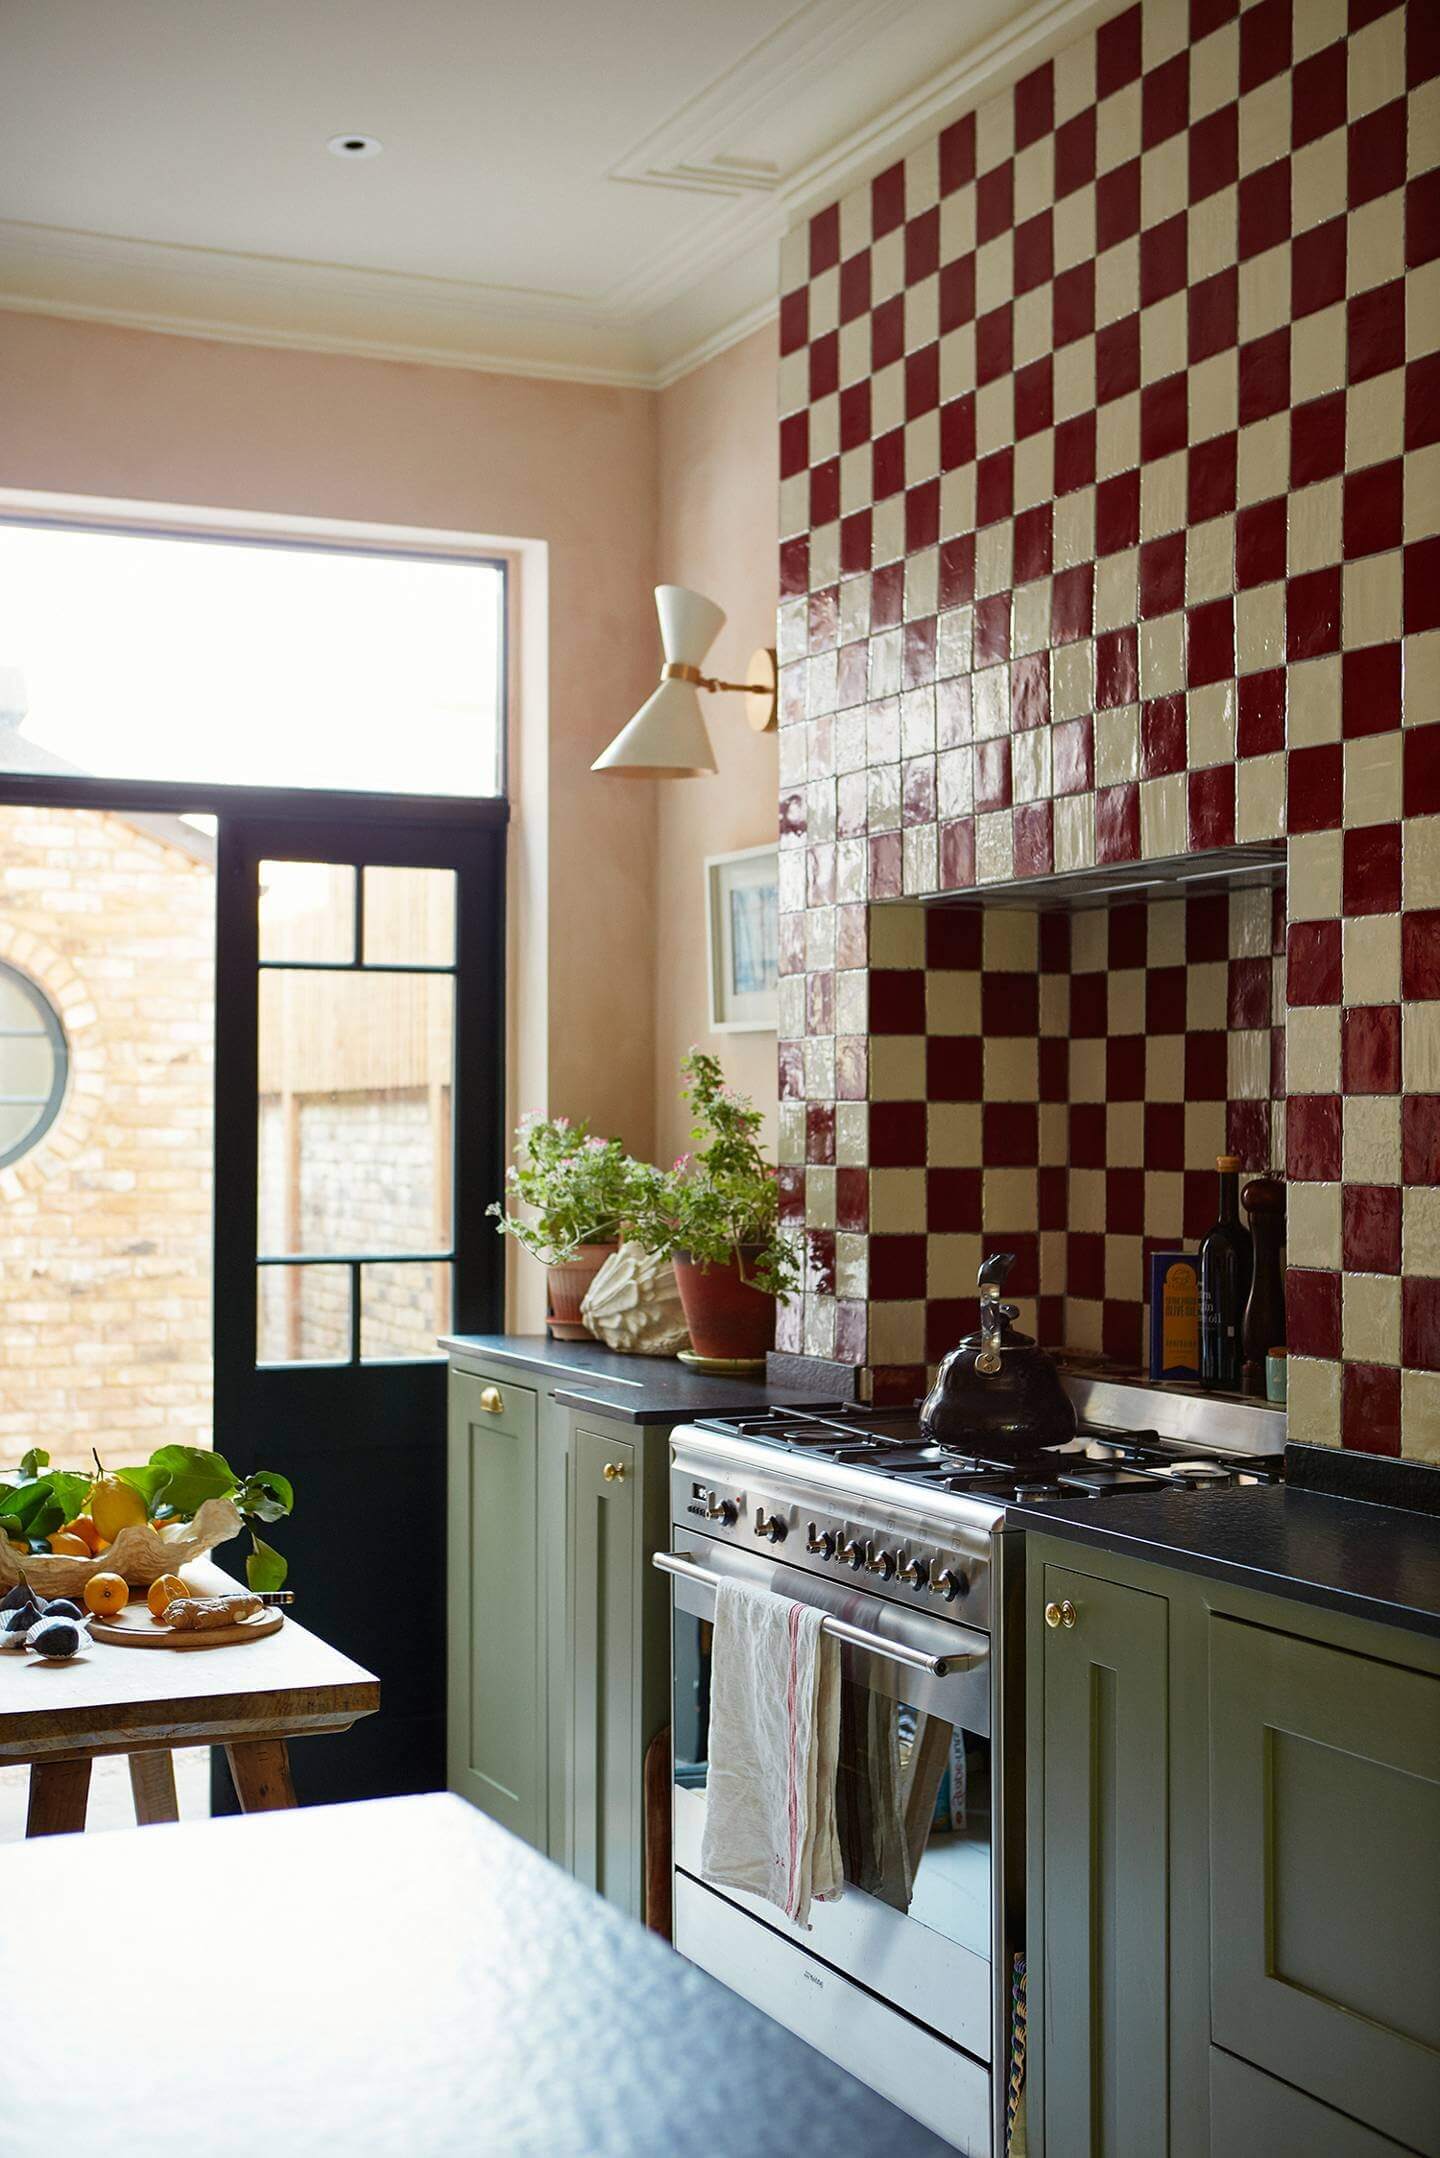 The Colorful Eclectic London Home of Designer Matilda Goad